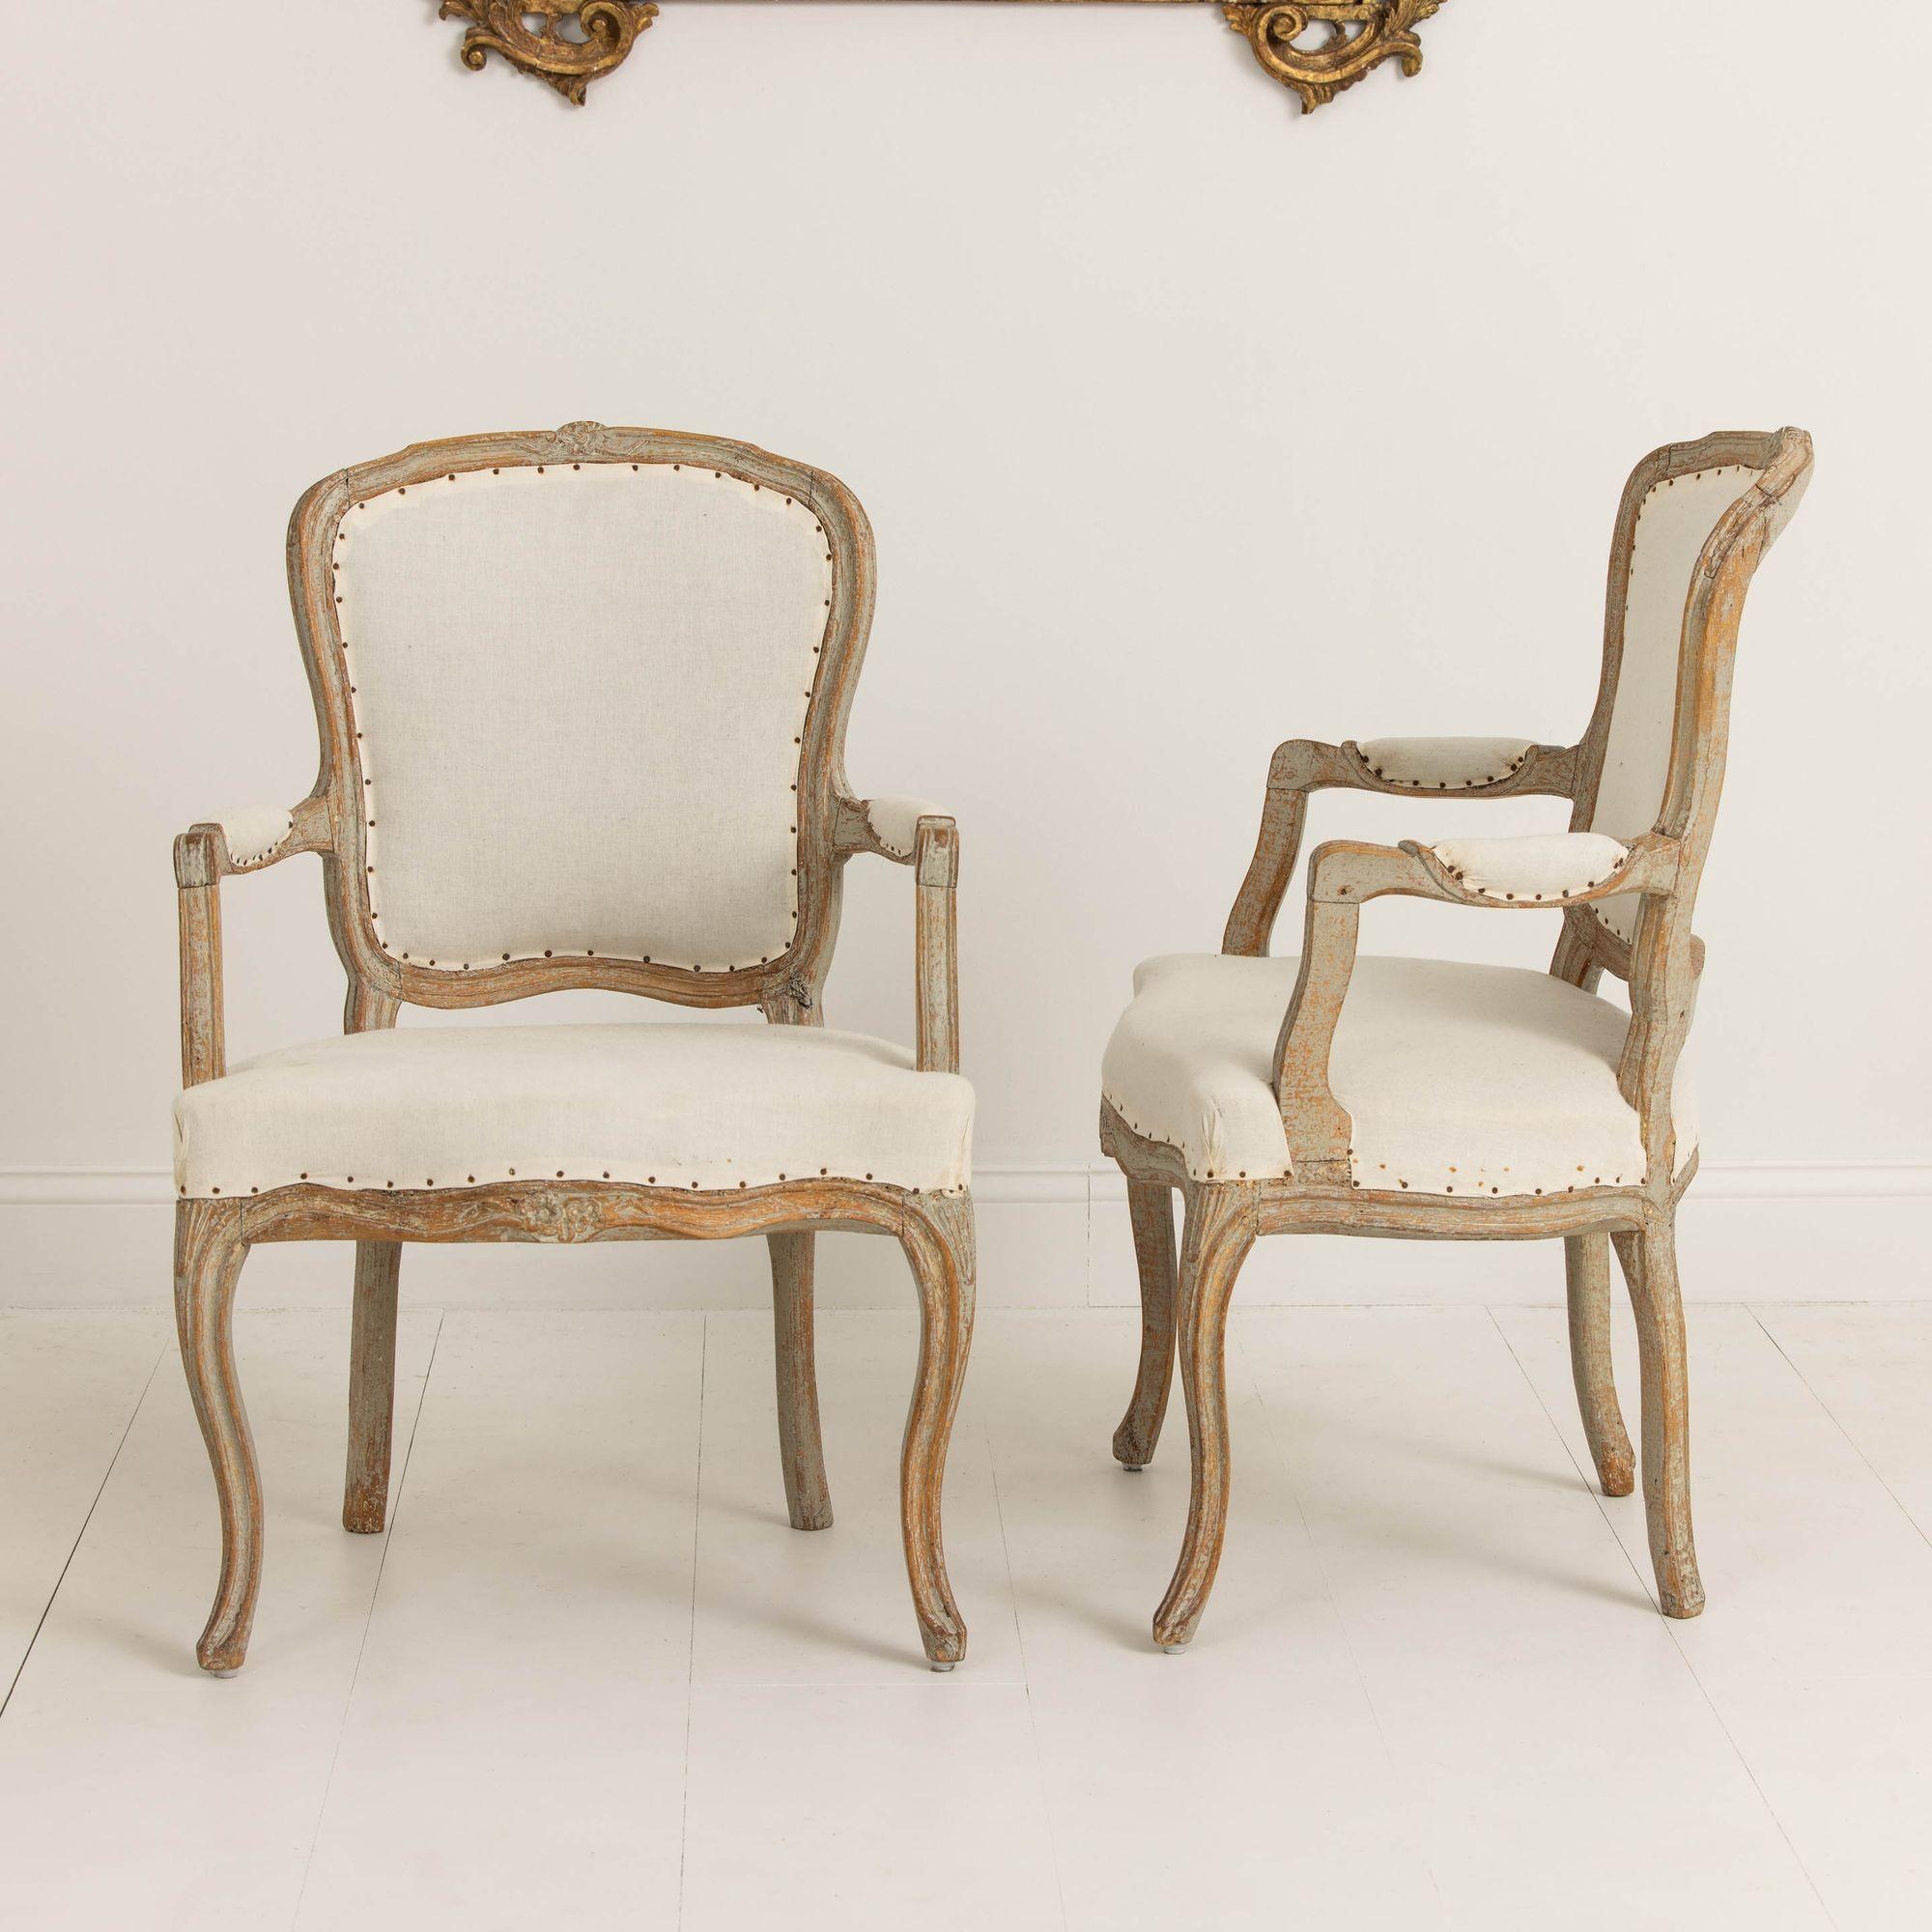 Pair of 18th c. Swedish Rococo Period Armchairs in Original Paint  In Excellent Condition For Sale In Wichita, KS